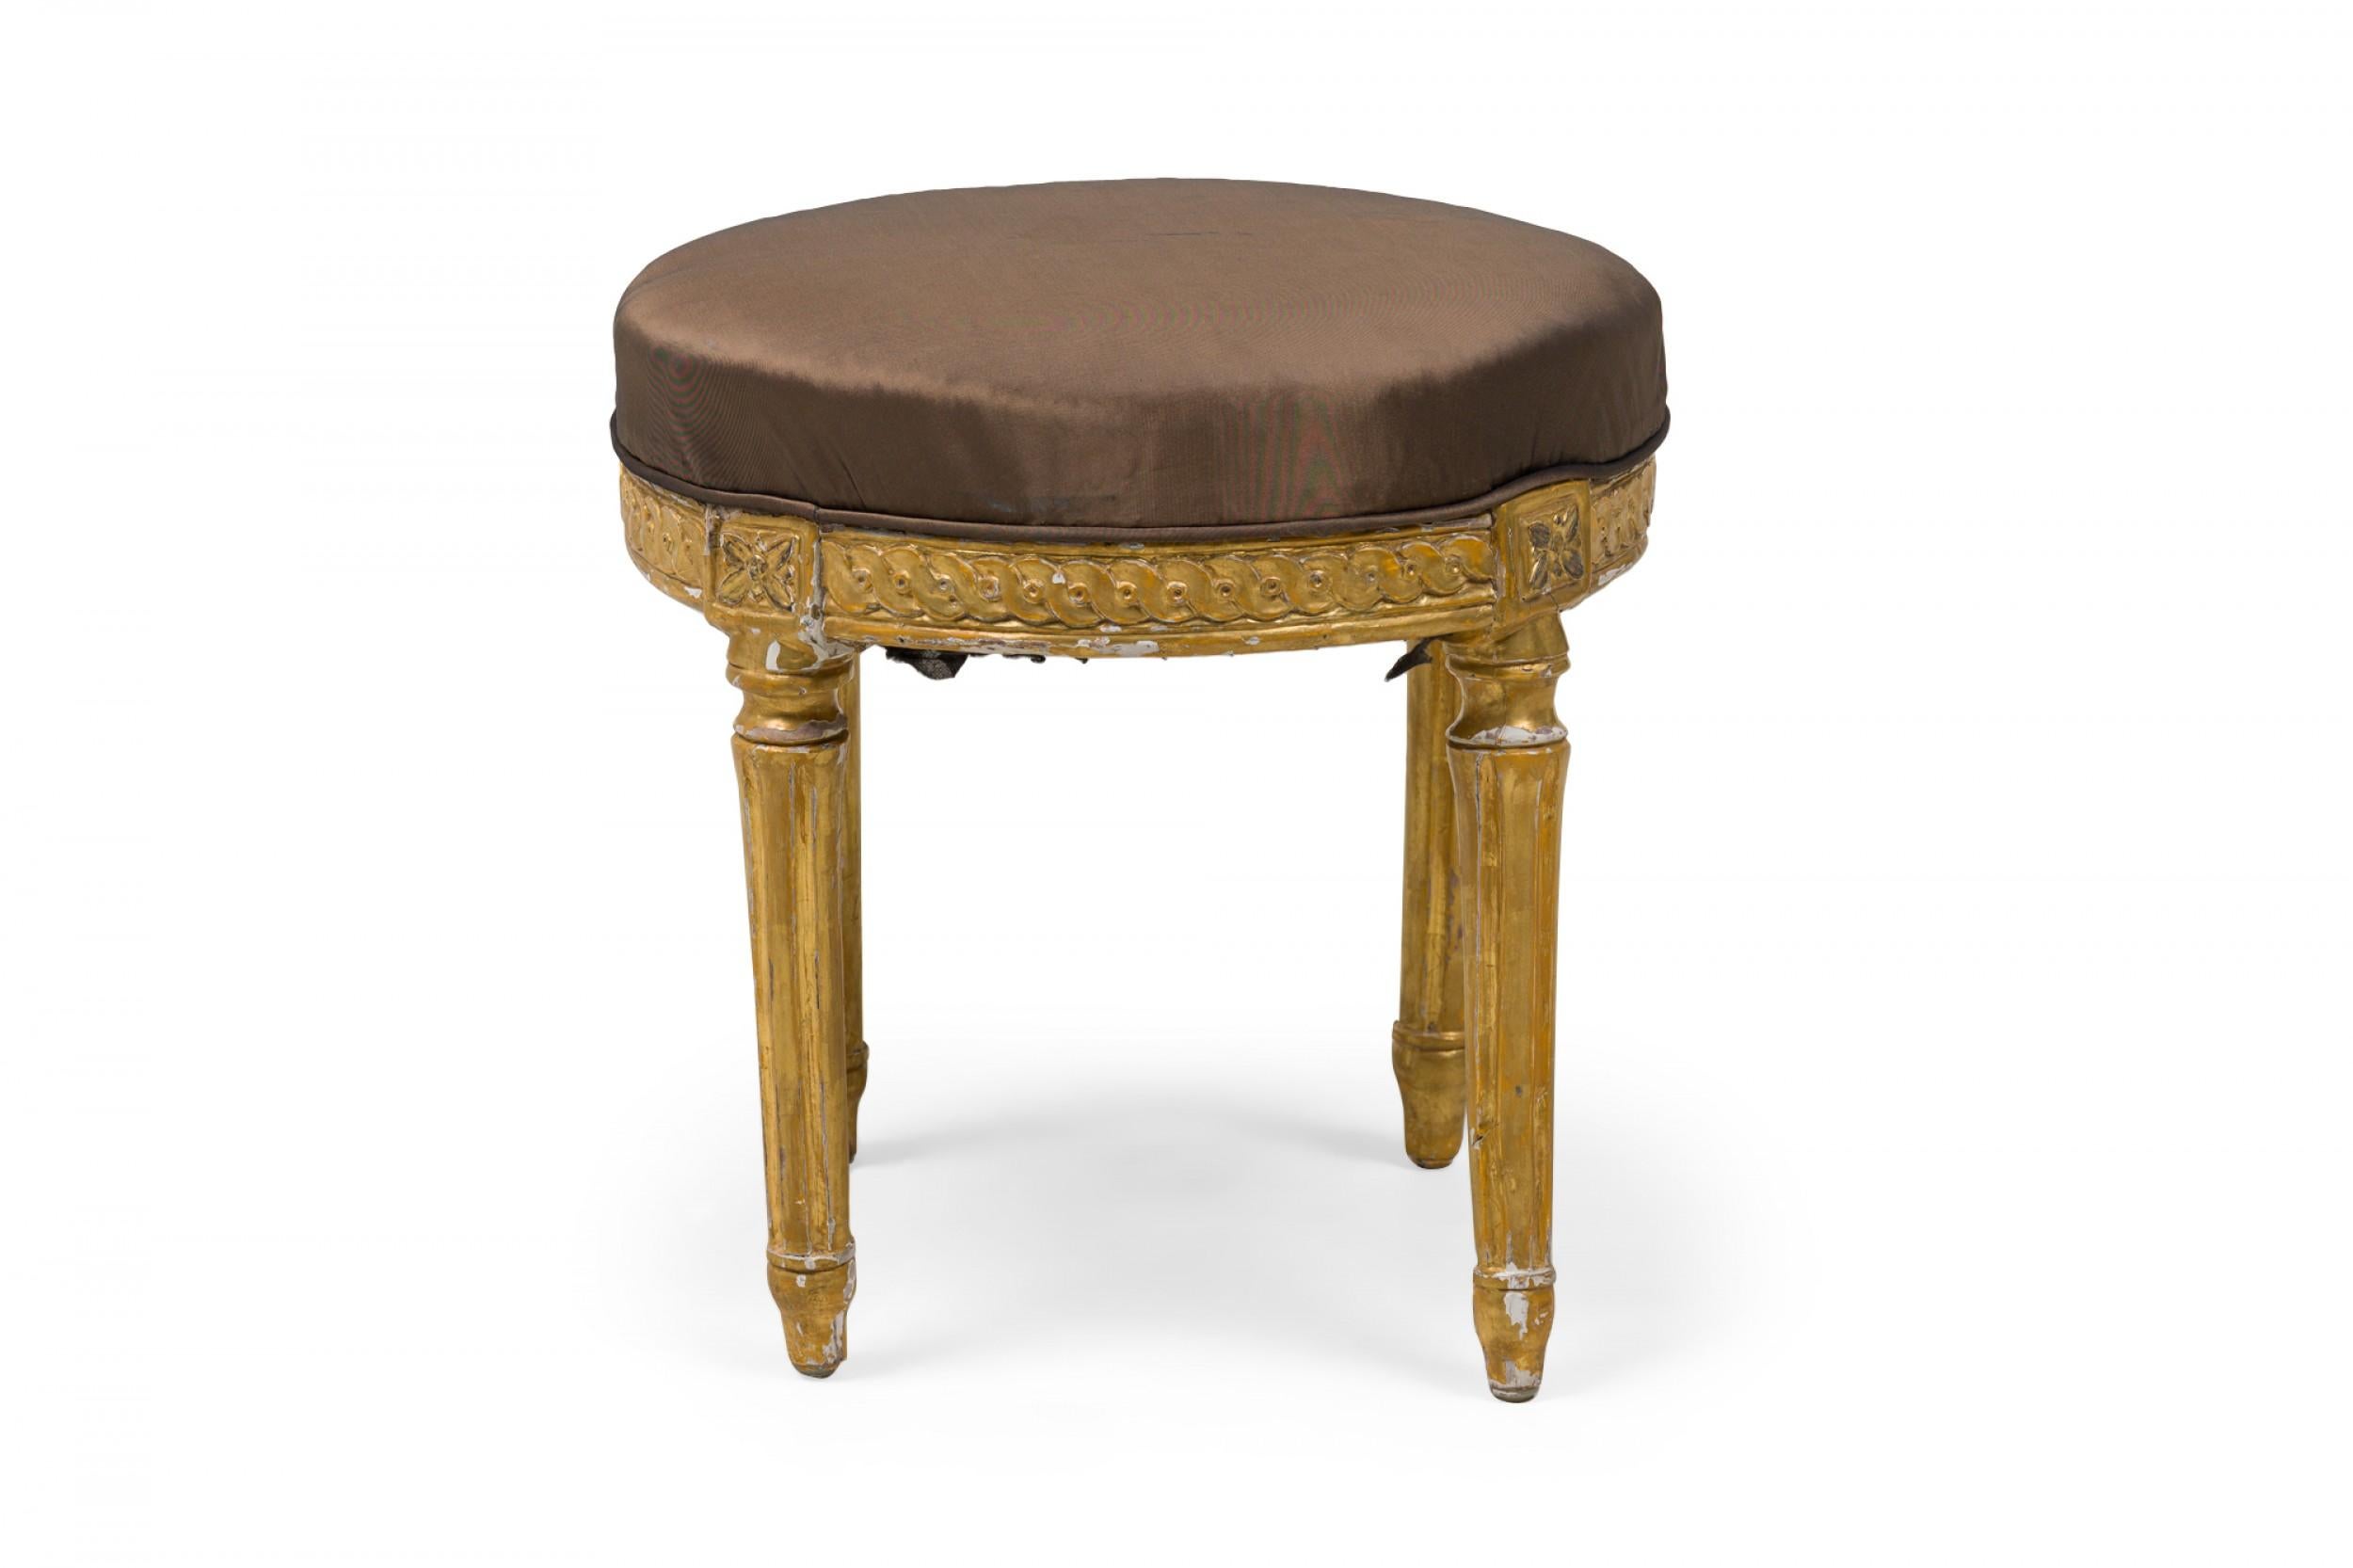 Pair of Italian Neo-Classic Giltwood Upholstered Taborets / Benches / Stools For Sale 3